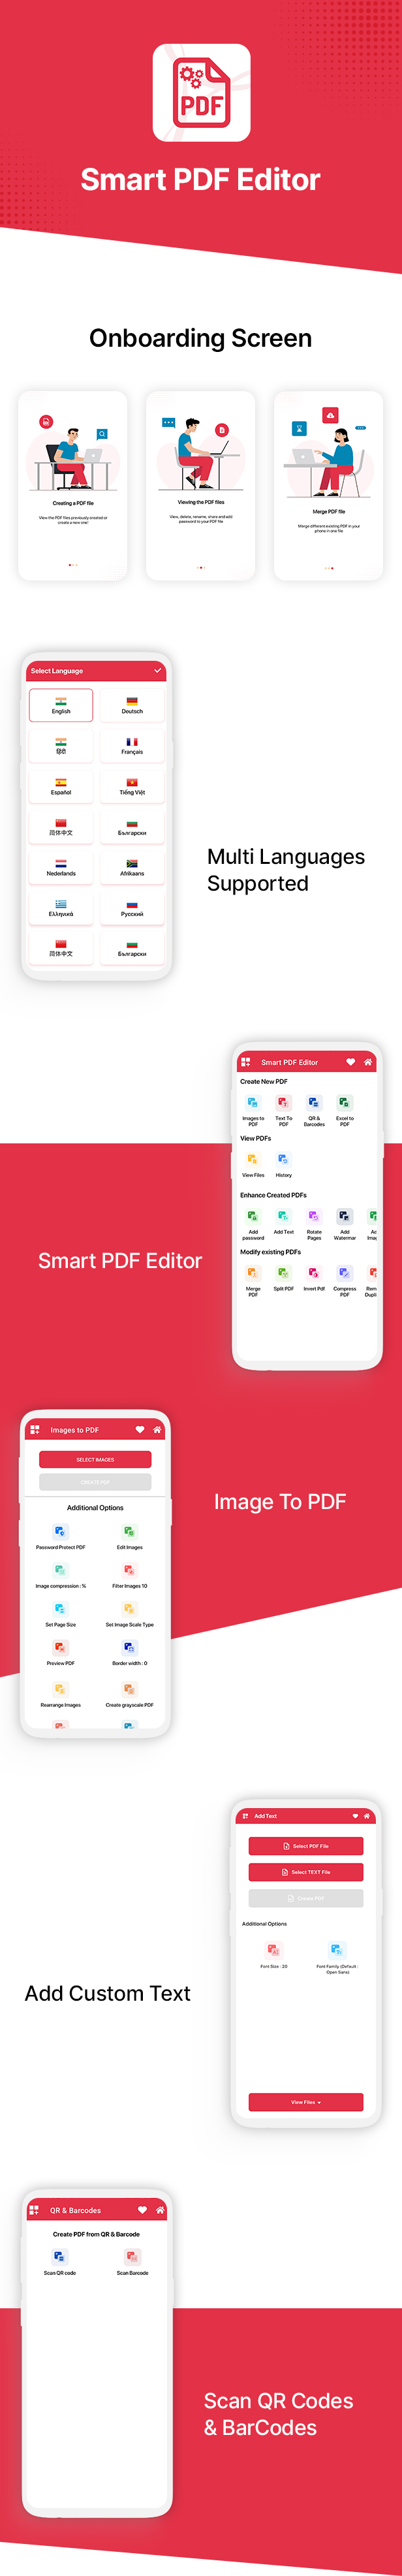 Smart PDF Editor – All in one PDF Tools, Image to PDF, Android App with Admob - 6